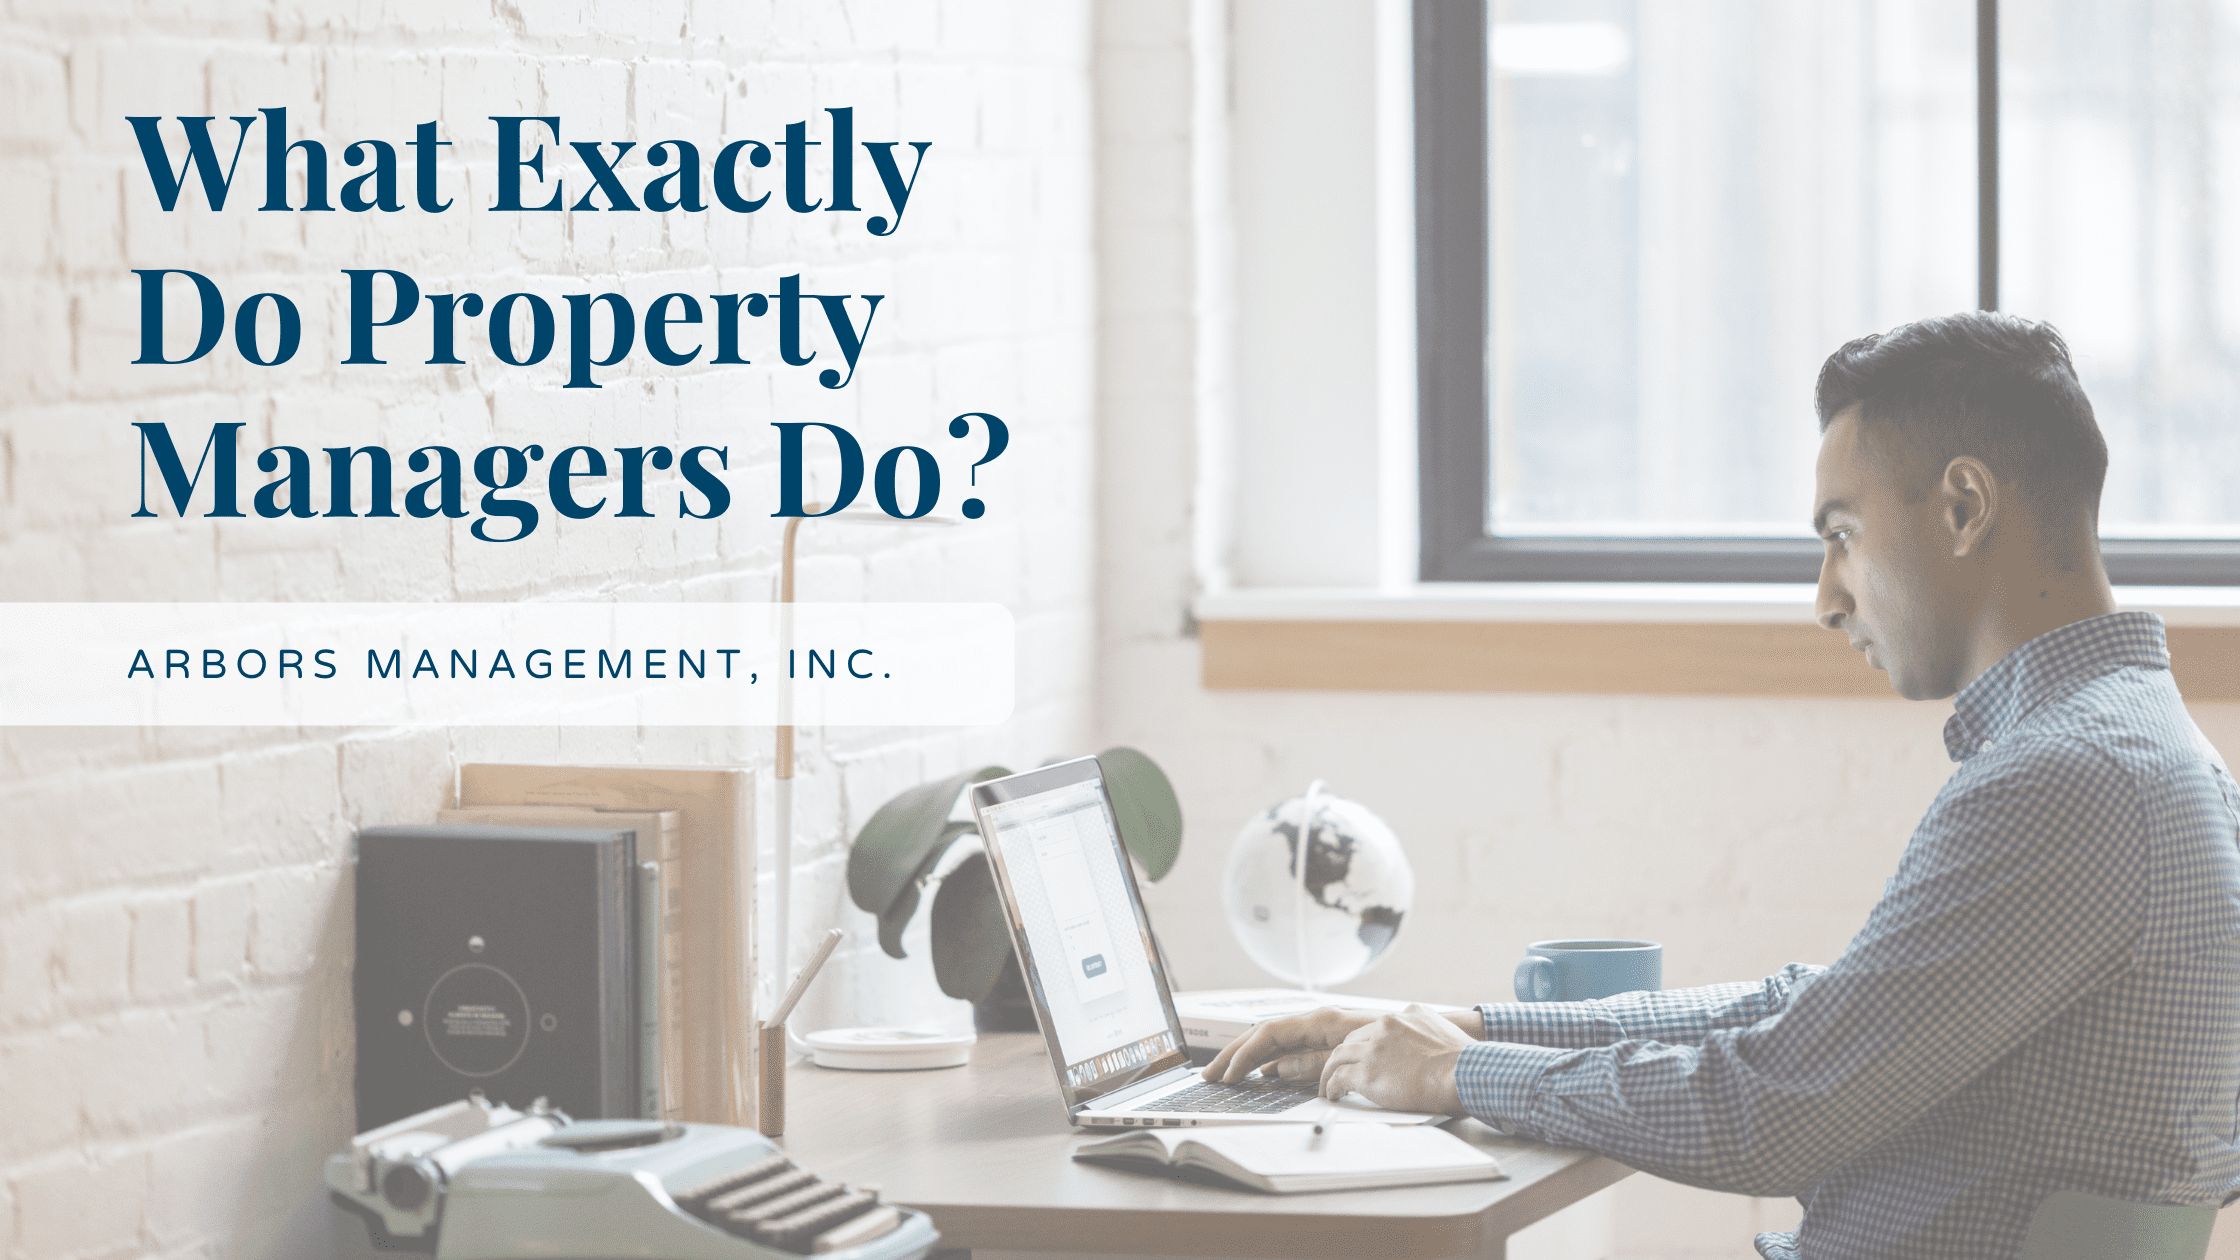 What Exactly Do Property Managers Do?